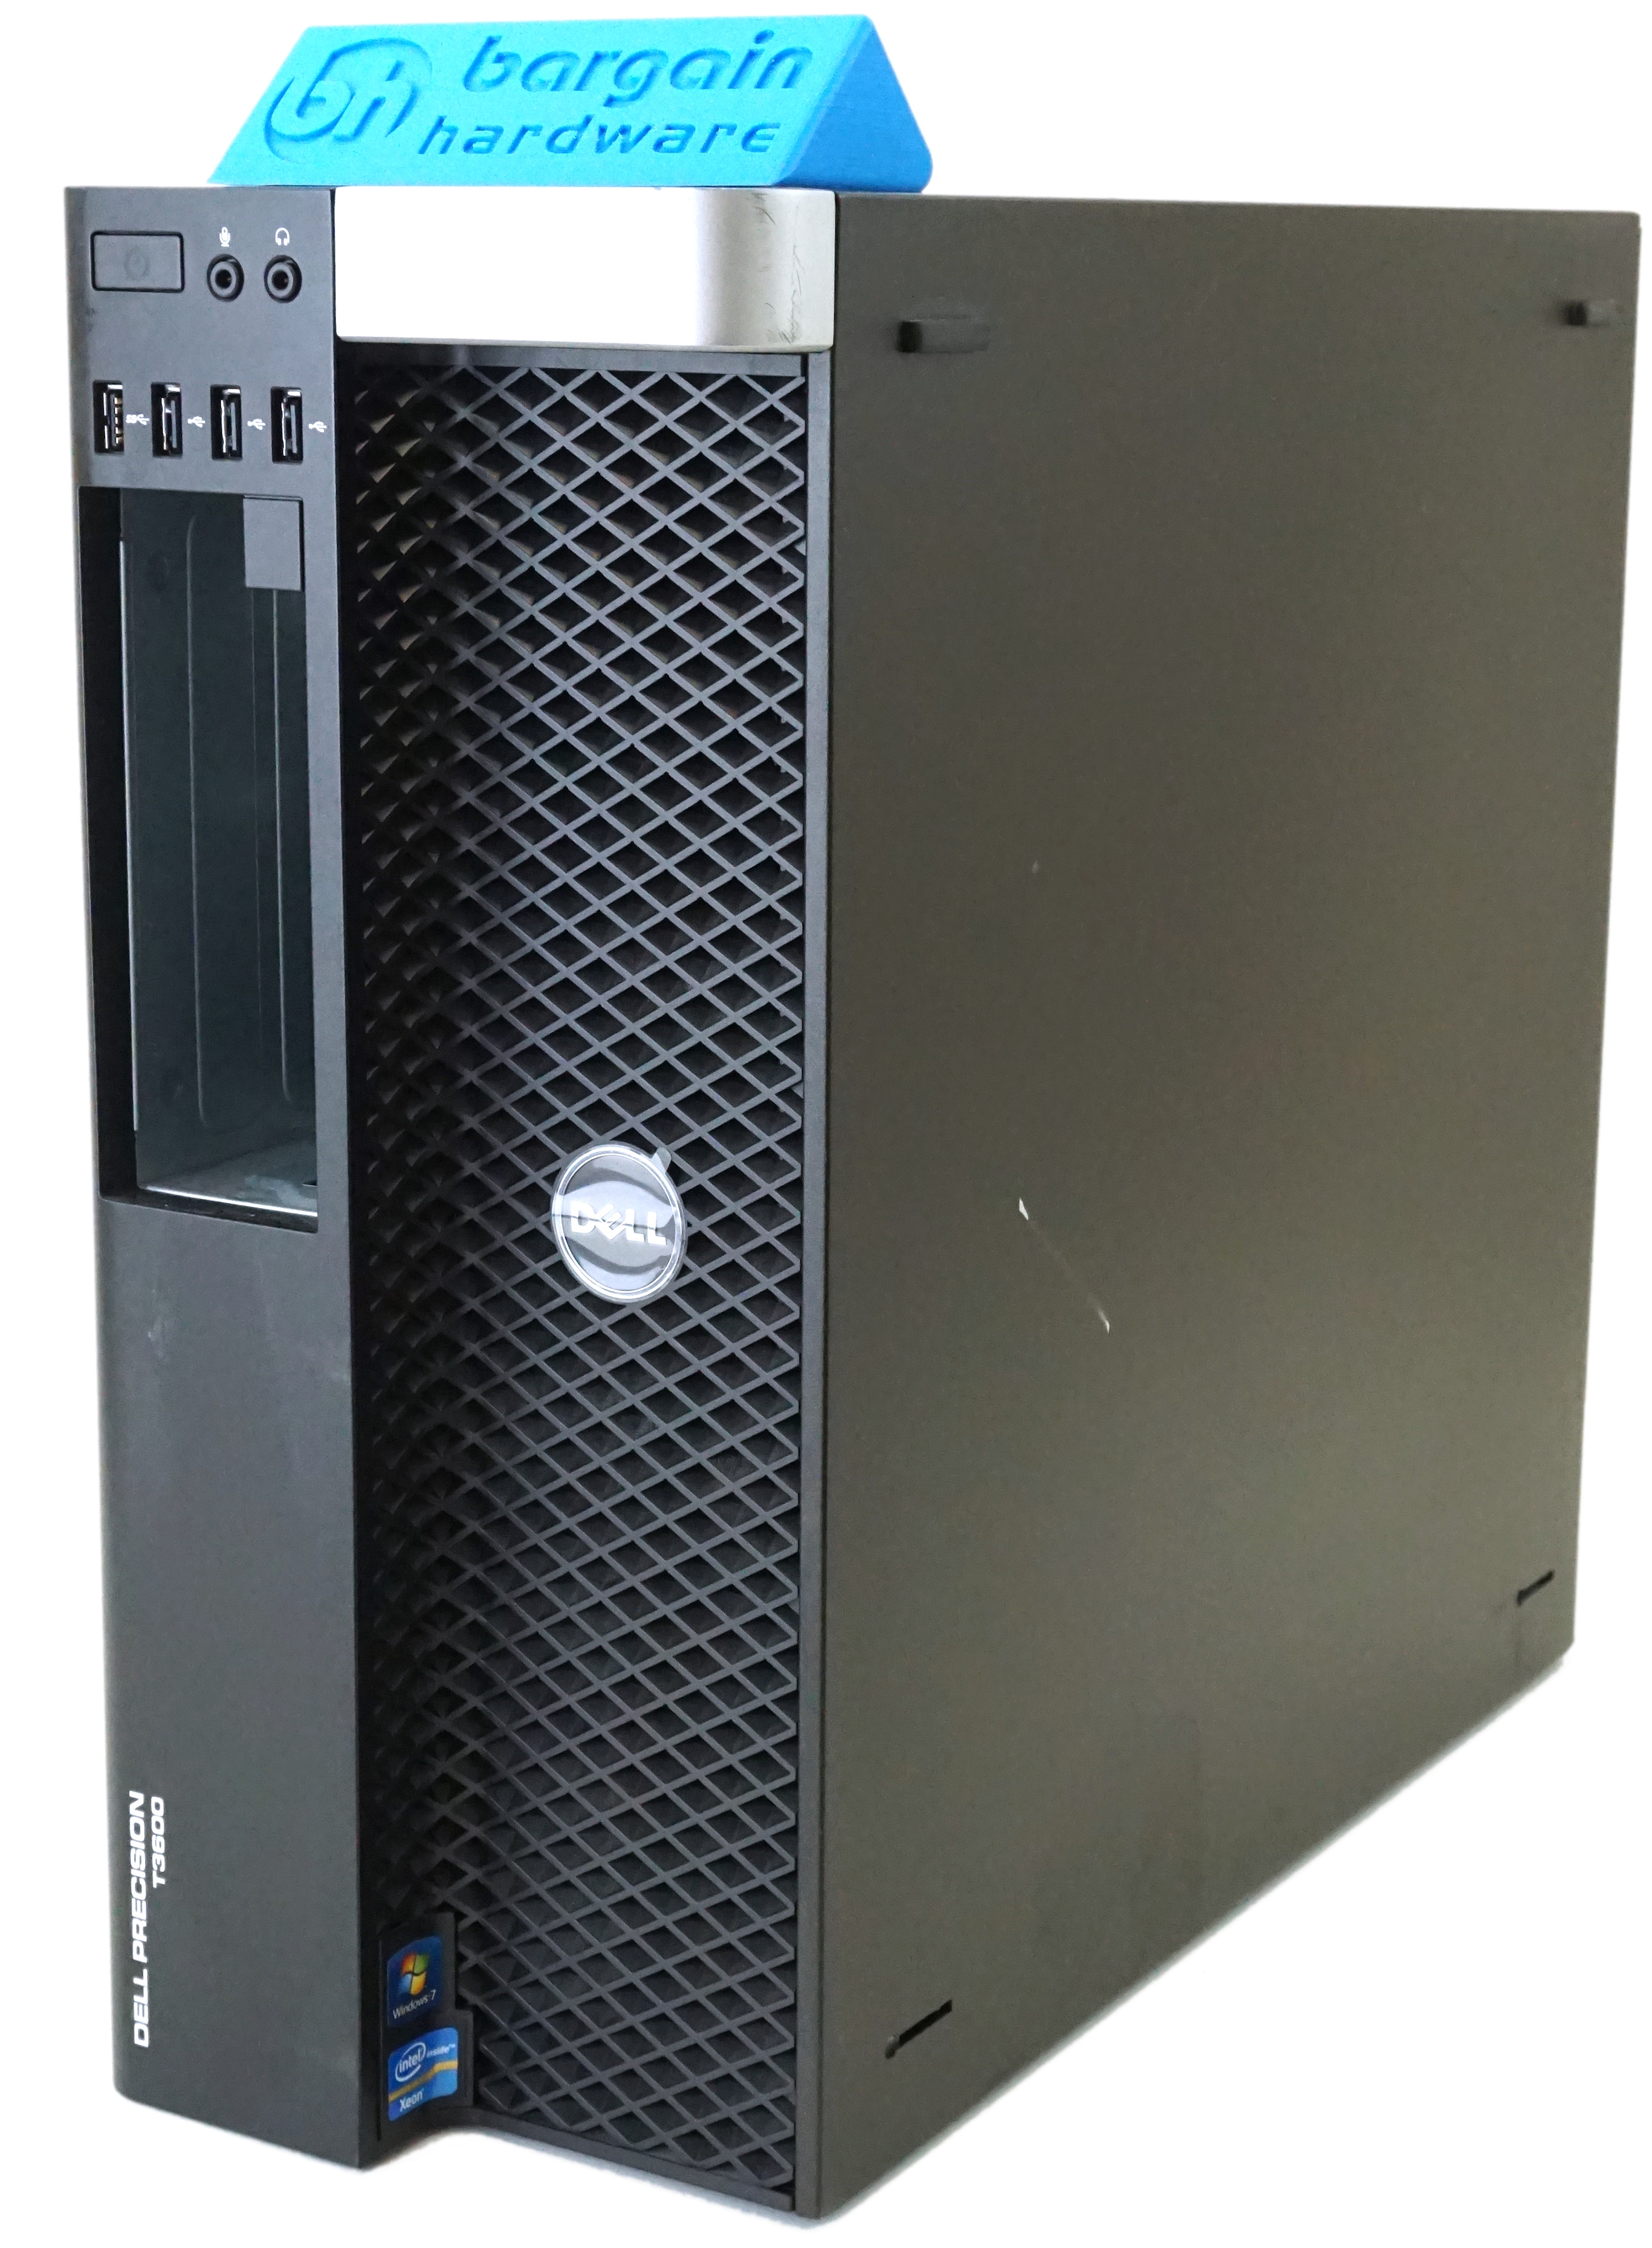 Dell Precision T3600 Workstation Eight 8-Core Xeon 64GB RAM Tower